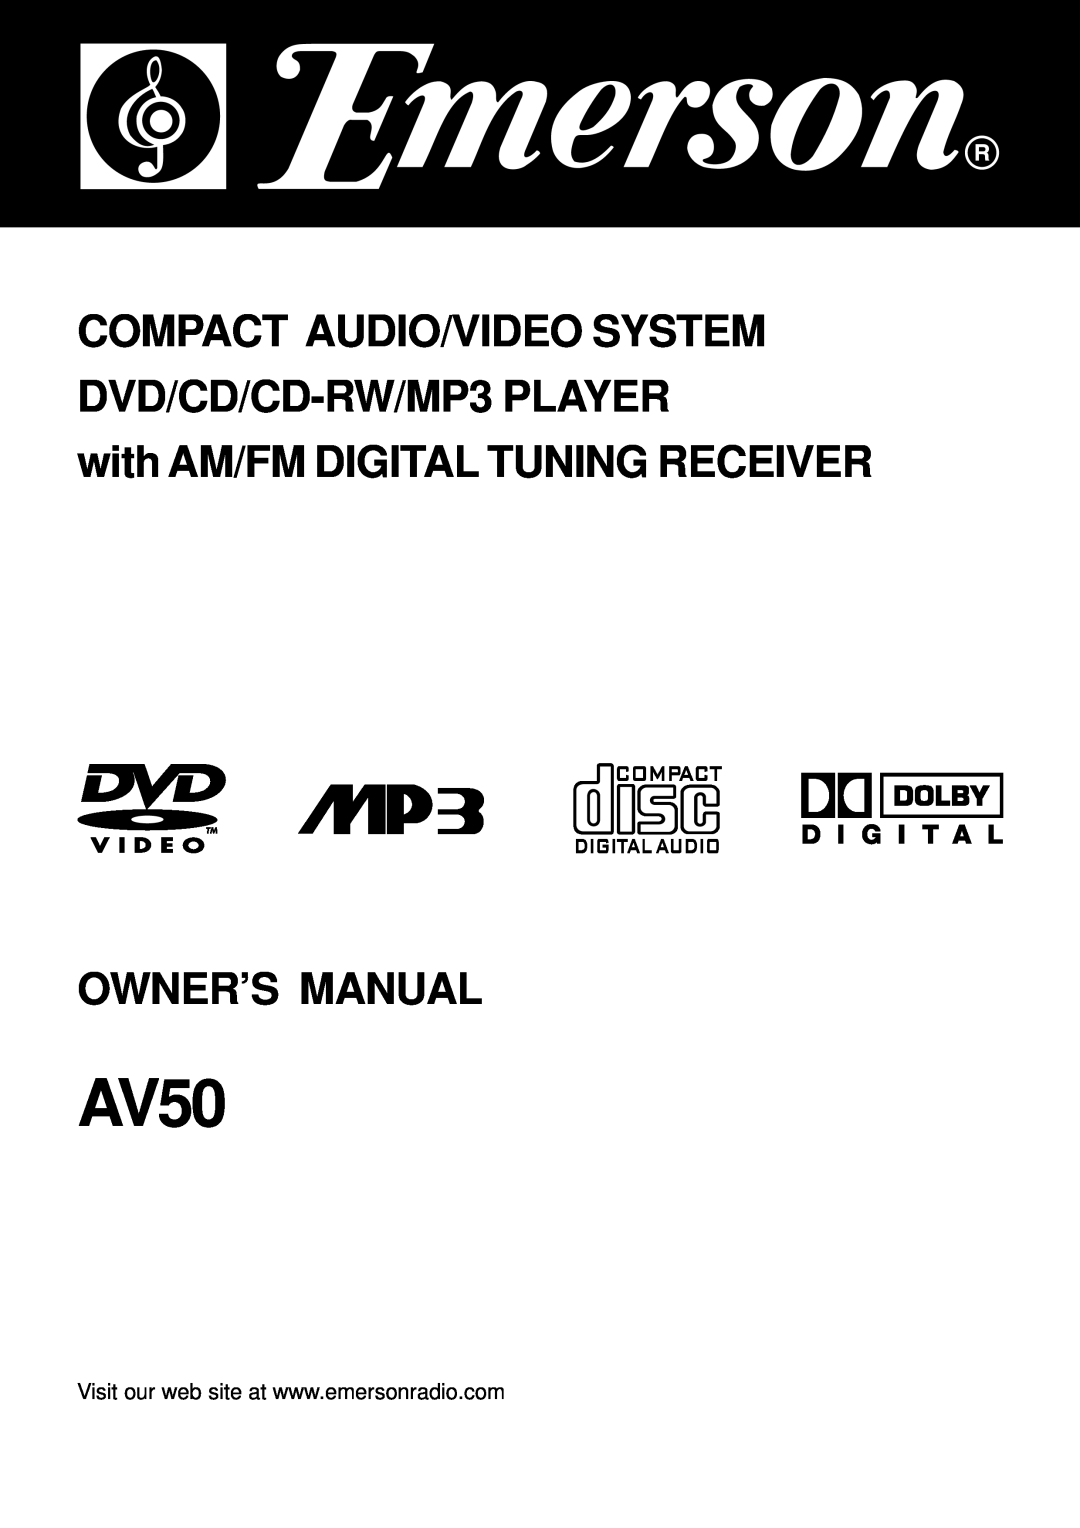 Emerson AV50 owner manual COMPACT AUDIO/VIDEO SYSTEM DVD/CD/CD-RW/MP3PLAYER 